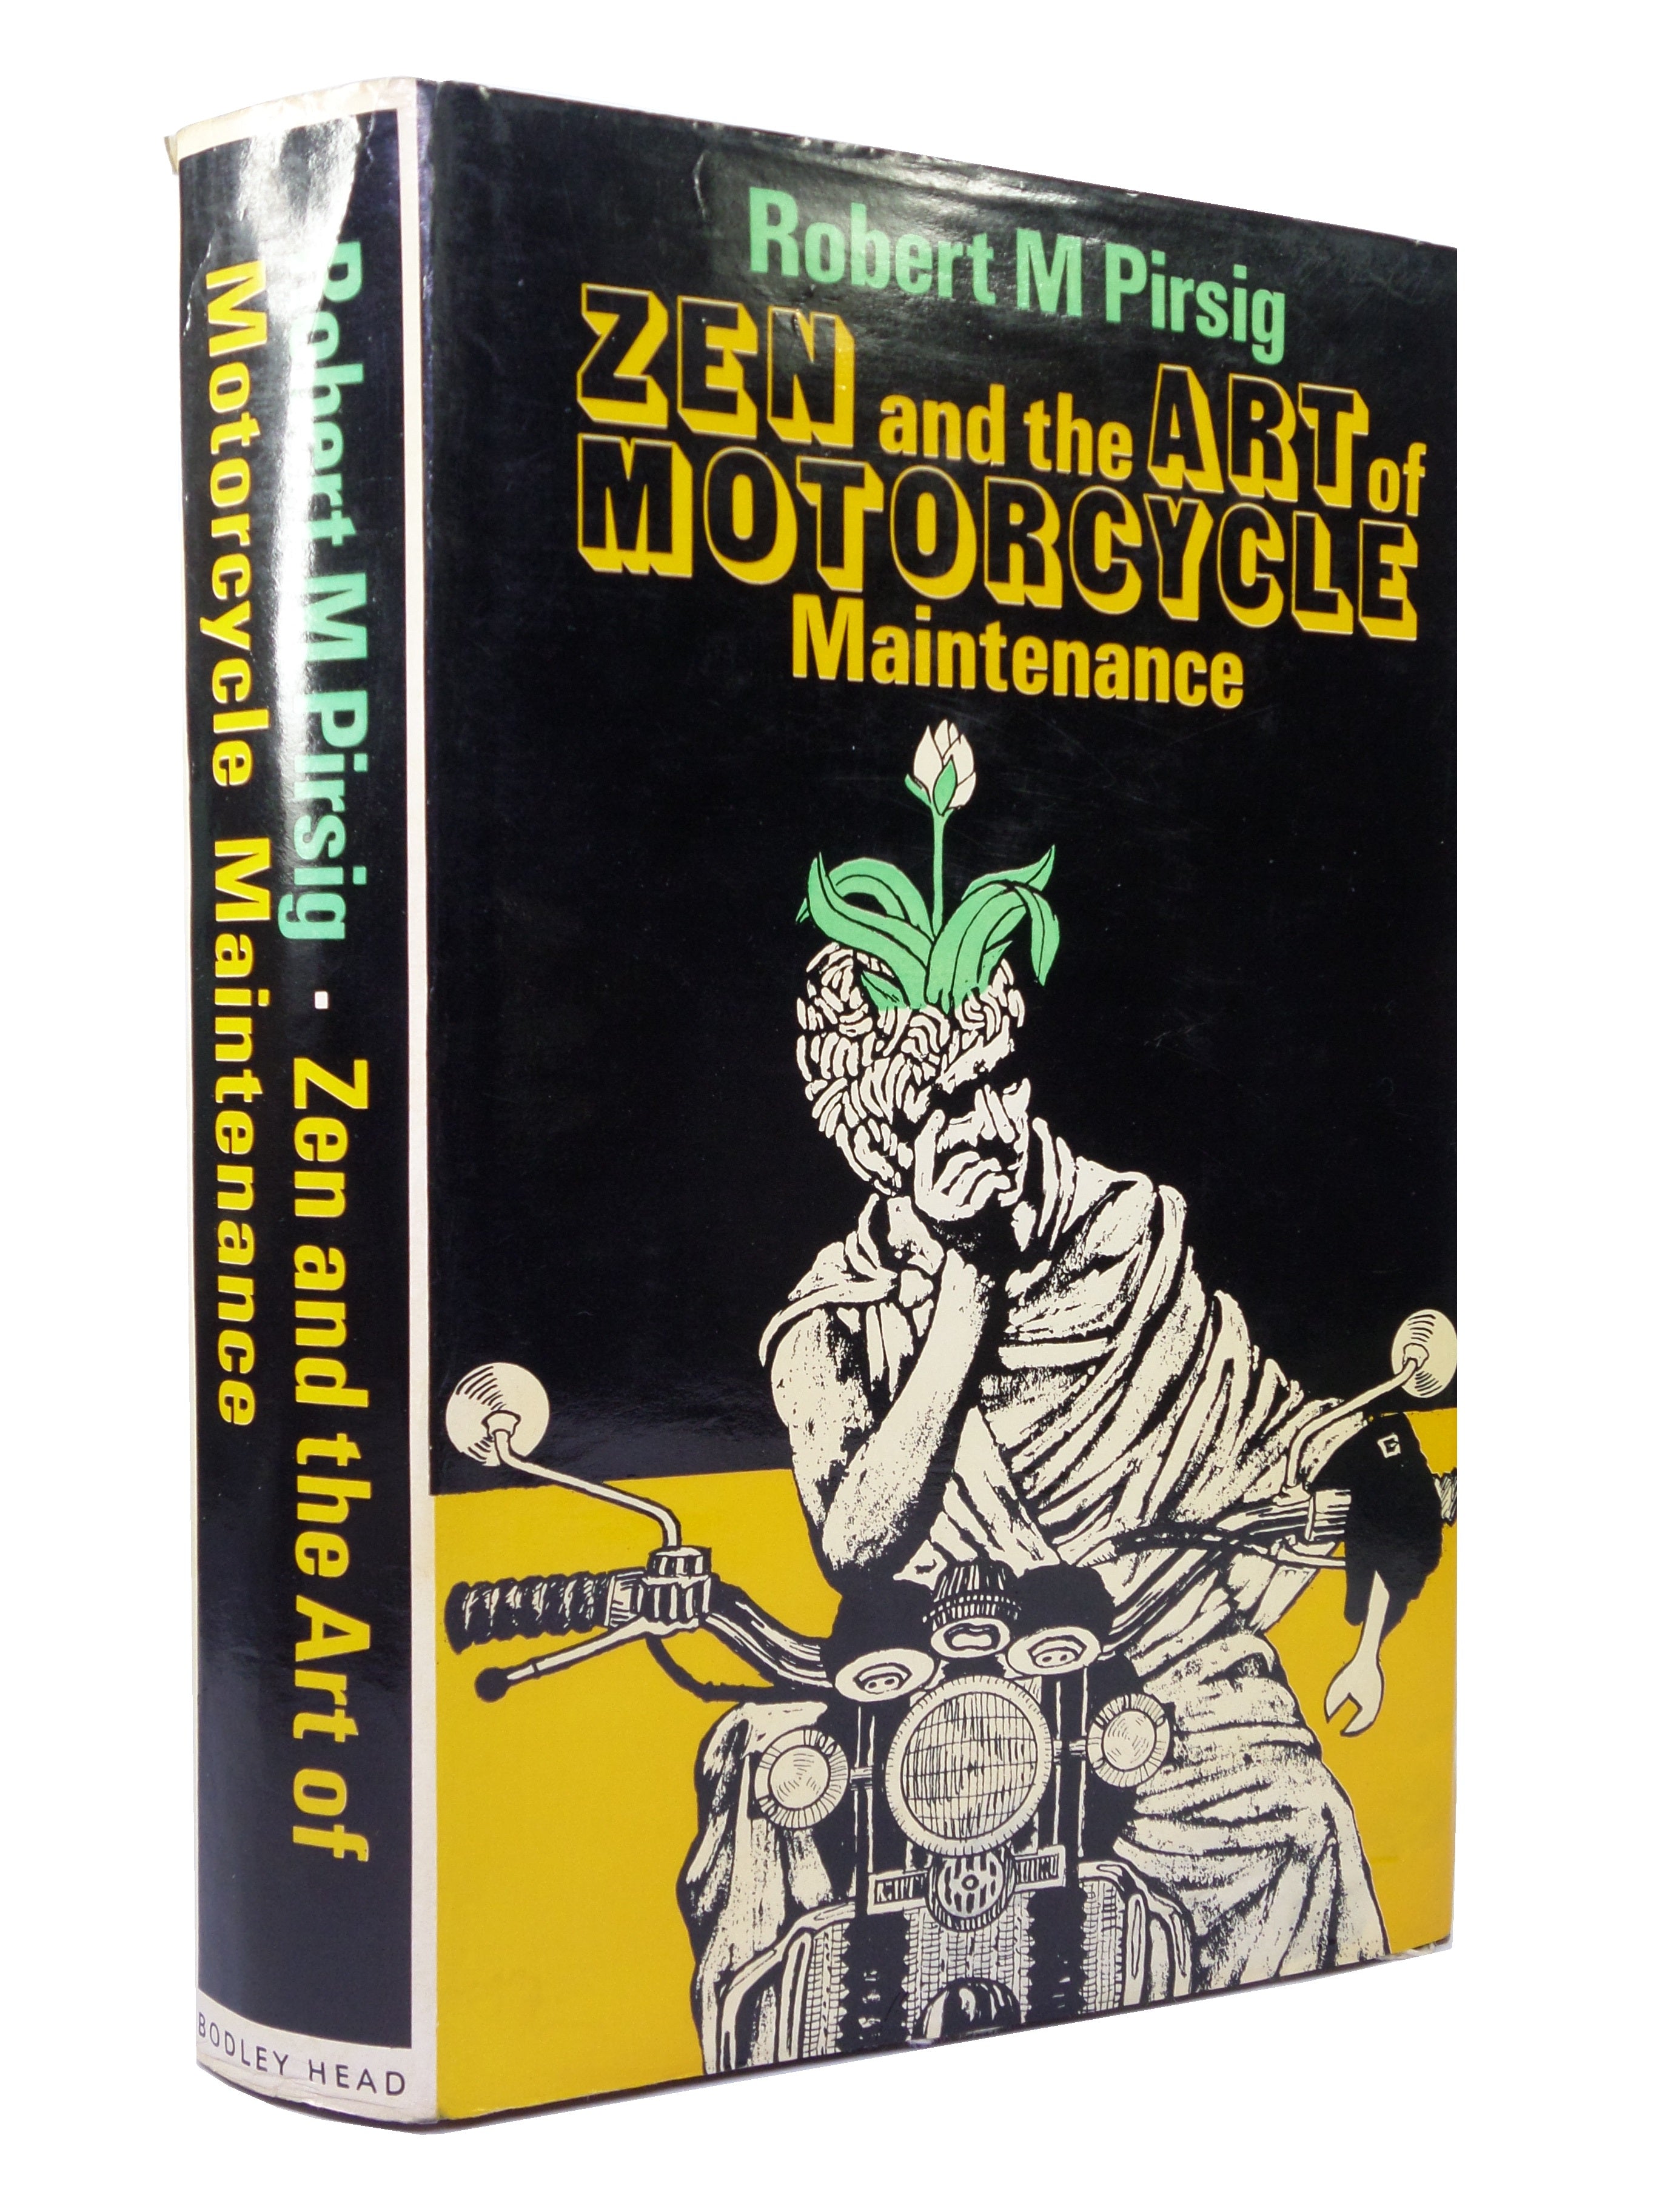 ZEN AND THE ART OF MOTORCYCLE MAINTENANCE BY ROBERT M. PIRSIG 1975 HARDCOVER